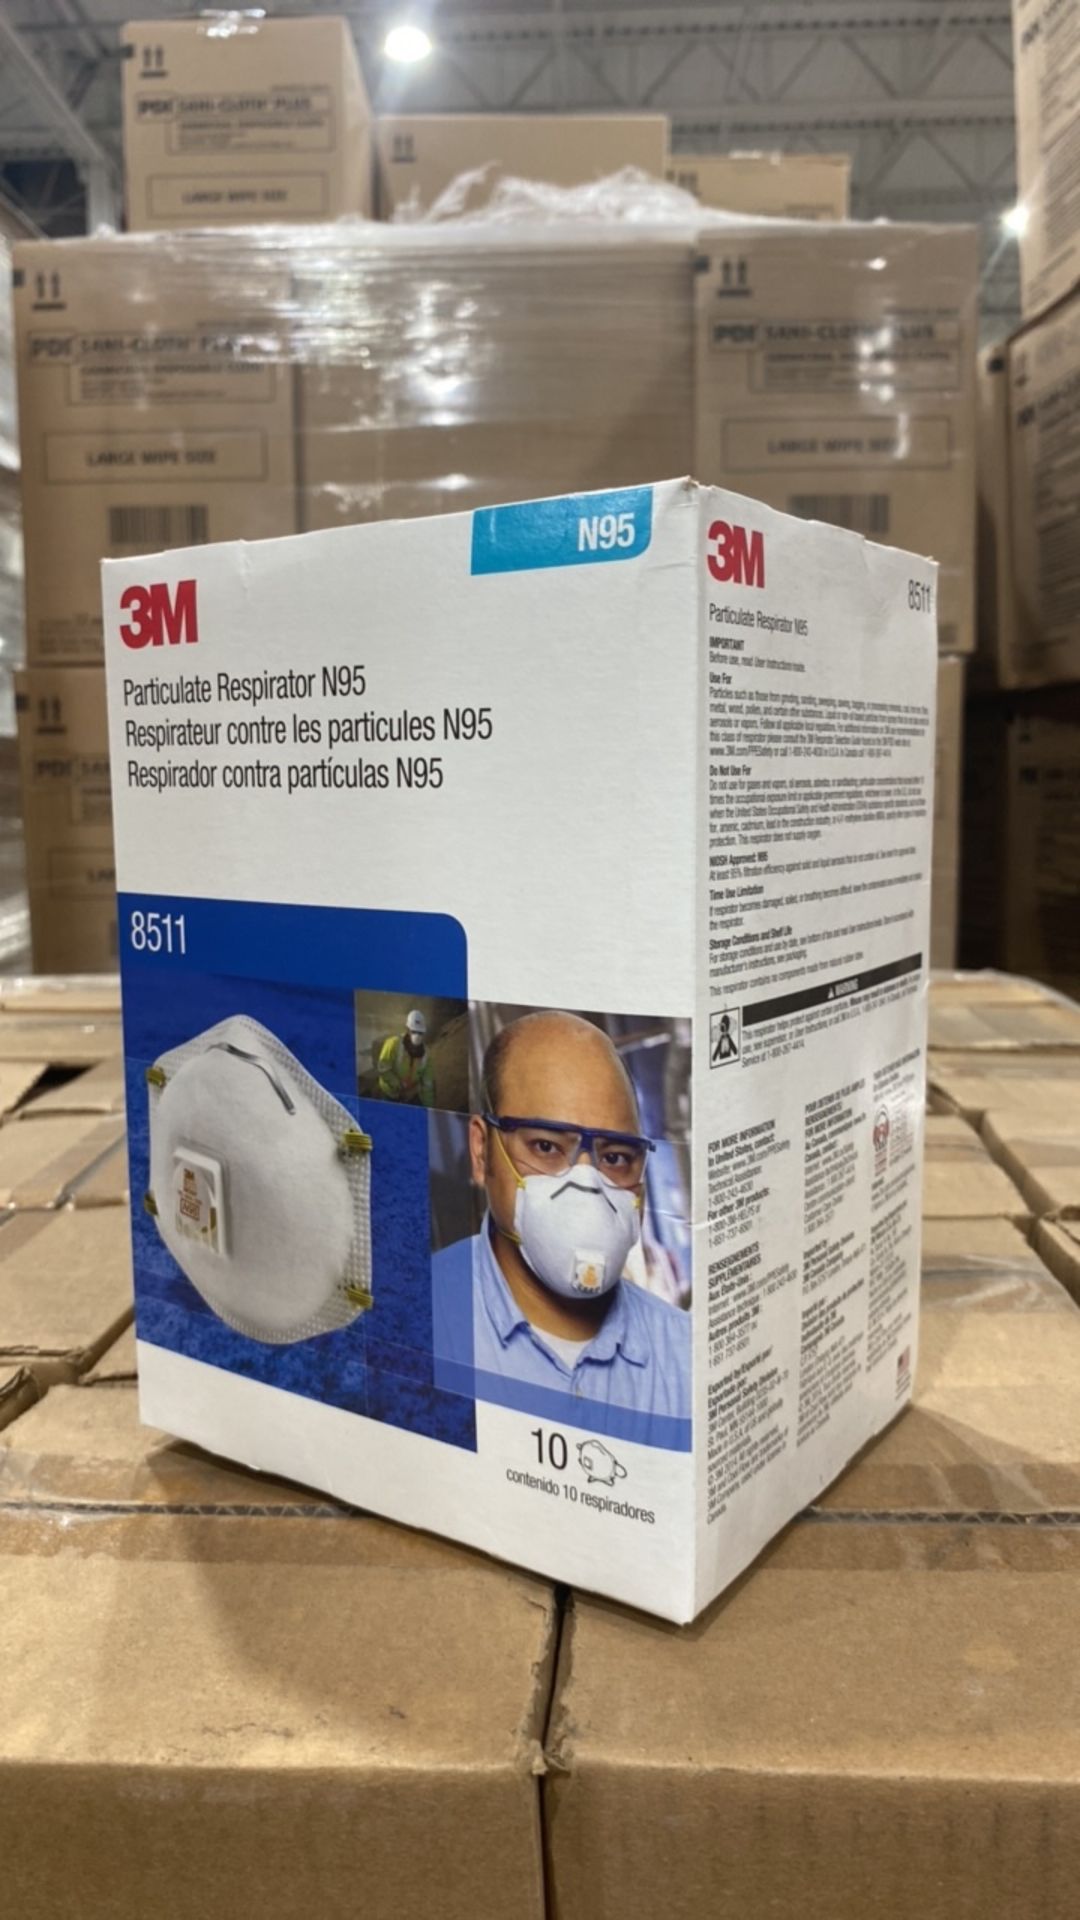 3M 8511 N95 PARTICULATE RESPIRATOR QTY:2800 - Image 2 of 2